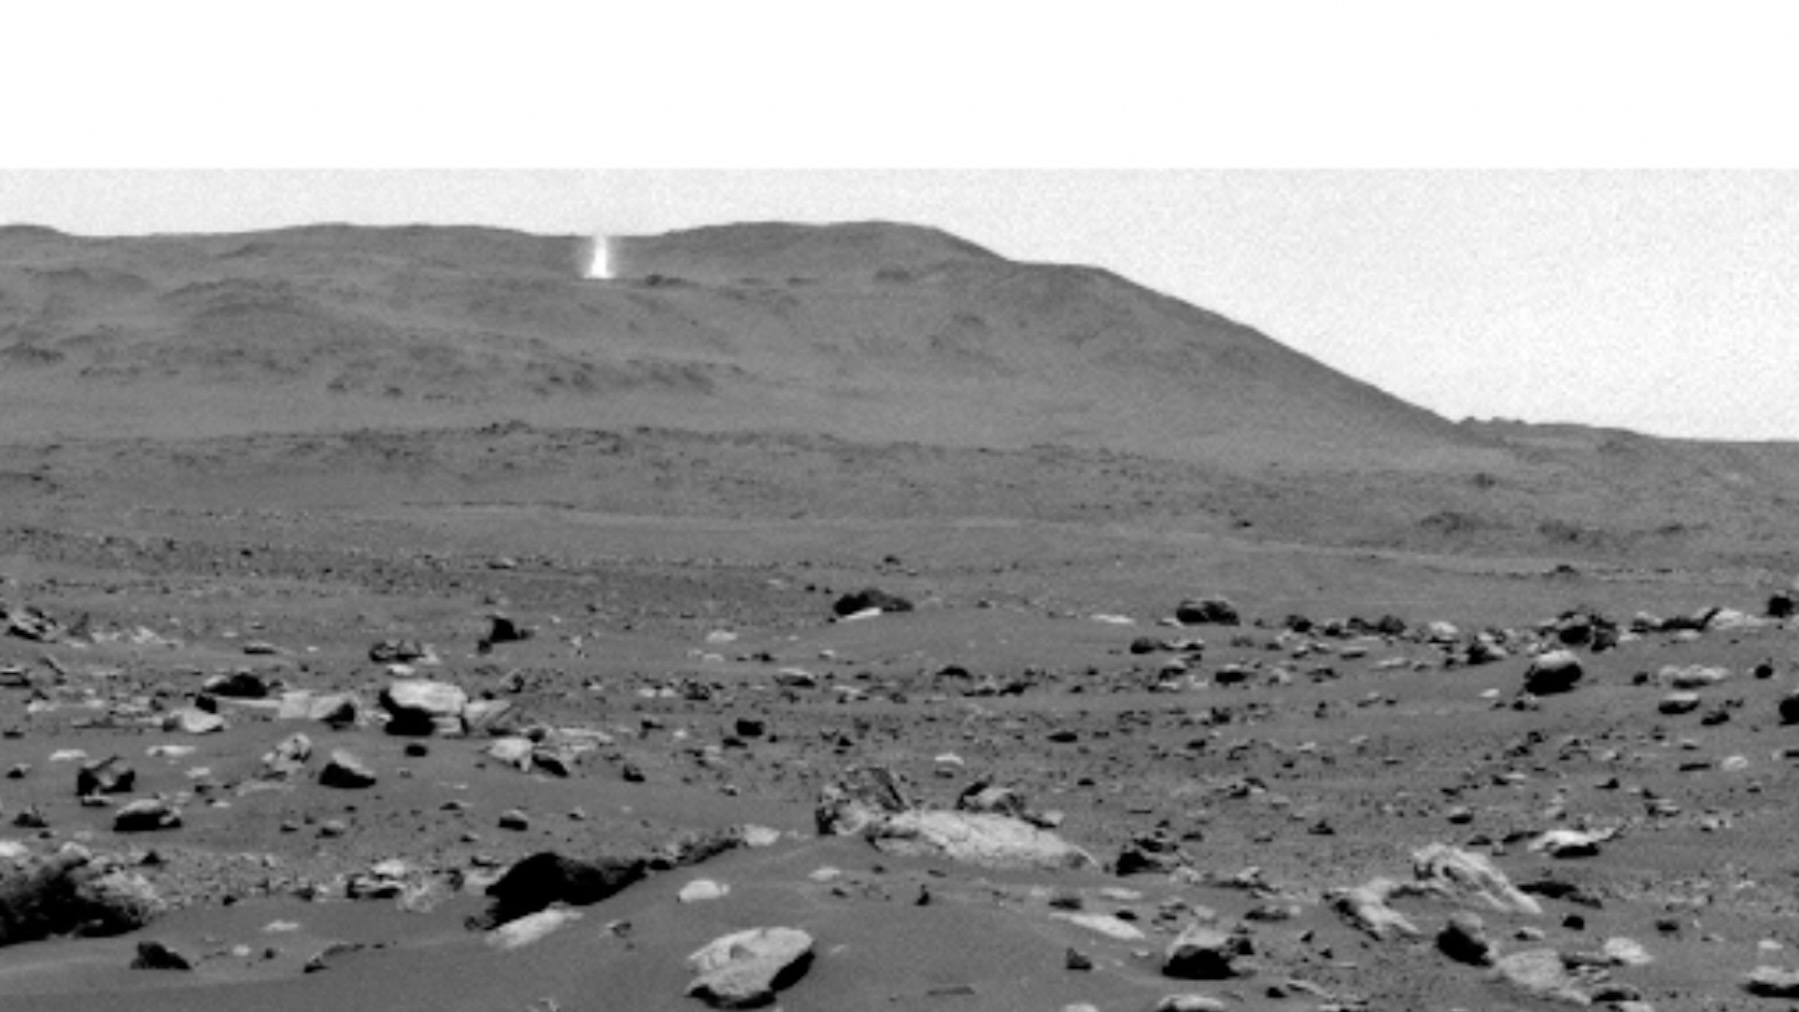 Watch a dust devil swirl across Mars in this video from NASA’s Perseverance rover